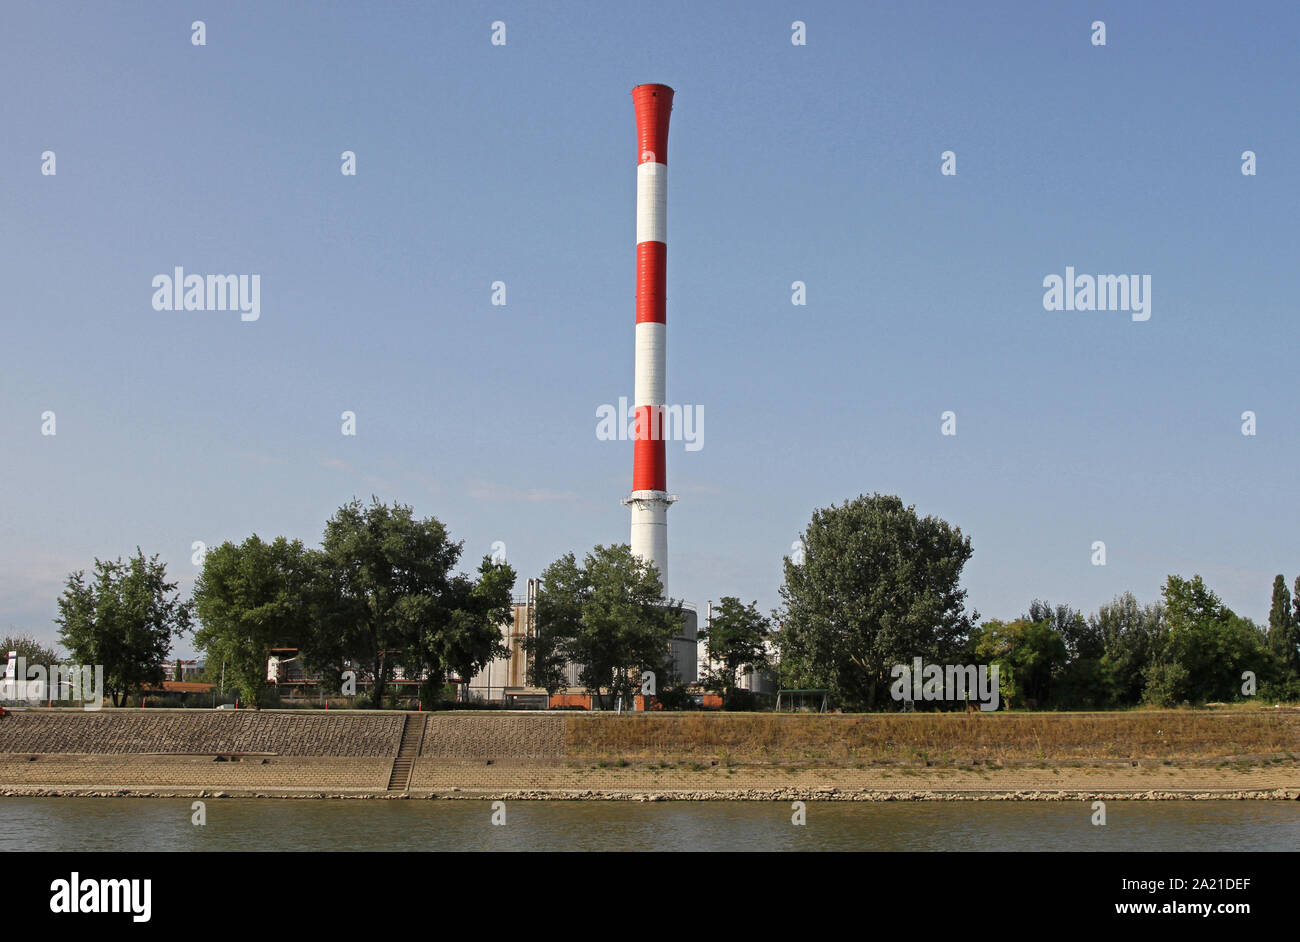 Heating plant tower (Toplana) at Ug Dorcol-Stara Centrala, Association of cities; For the; Tourism; Tourist; And; Recreation on the water of Dorcol- old central, a historical landmark on the Danube River, Belgrade; Serbia. Stock Photo